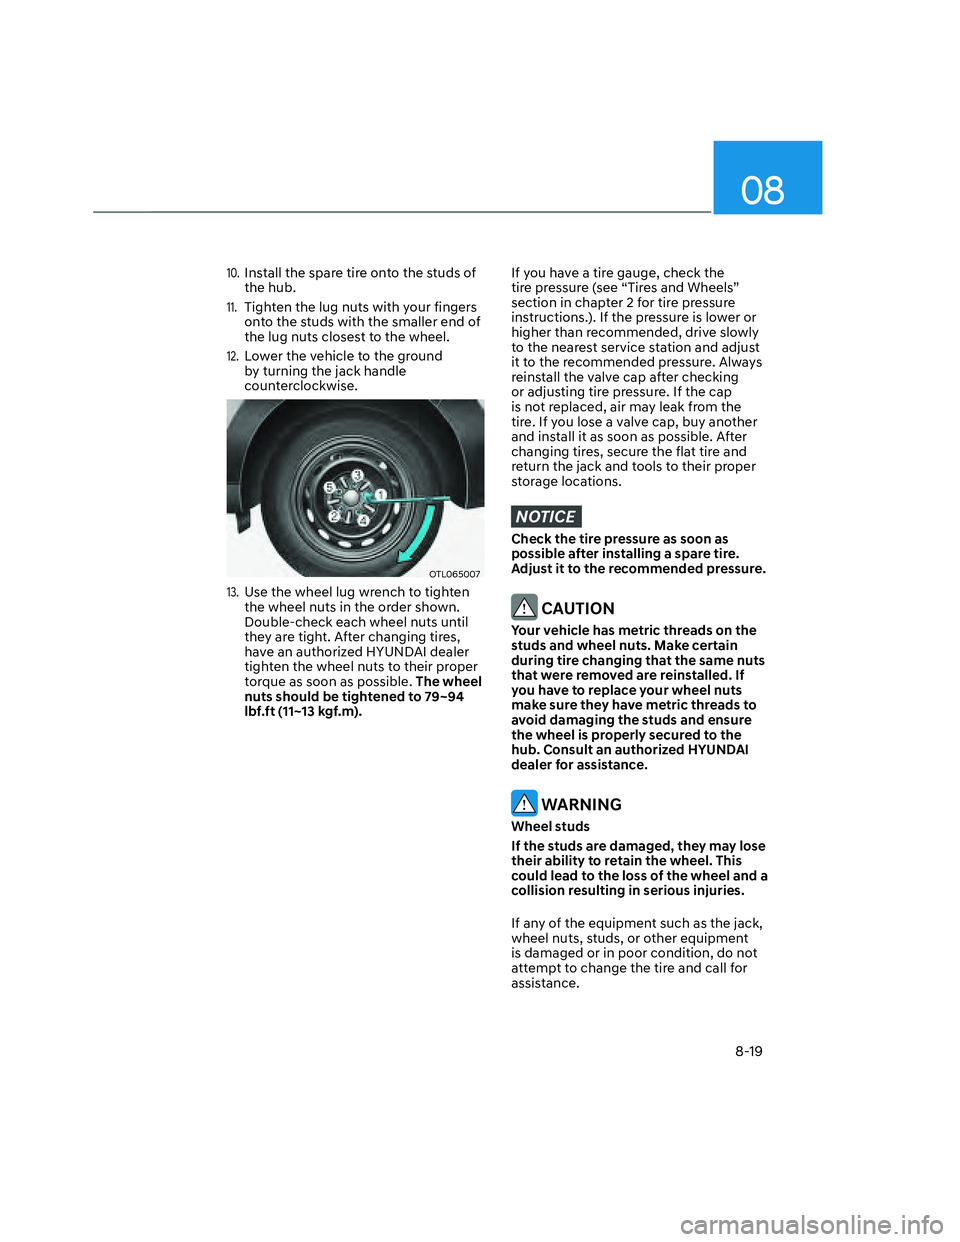 HYUNDAI SANTA CRUZ 2022 Owners Guide 08
8-19
10. Install the spare tire onto the studs of 
the hub. 
11. Tighten the lug nuts with your fingers 
onto the studs with the smaller end of 
the lug nuts closest to the wheel. 
12. Lower the ve